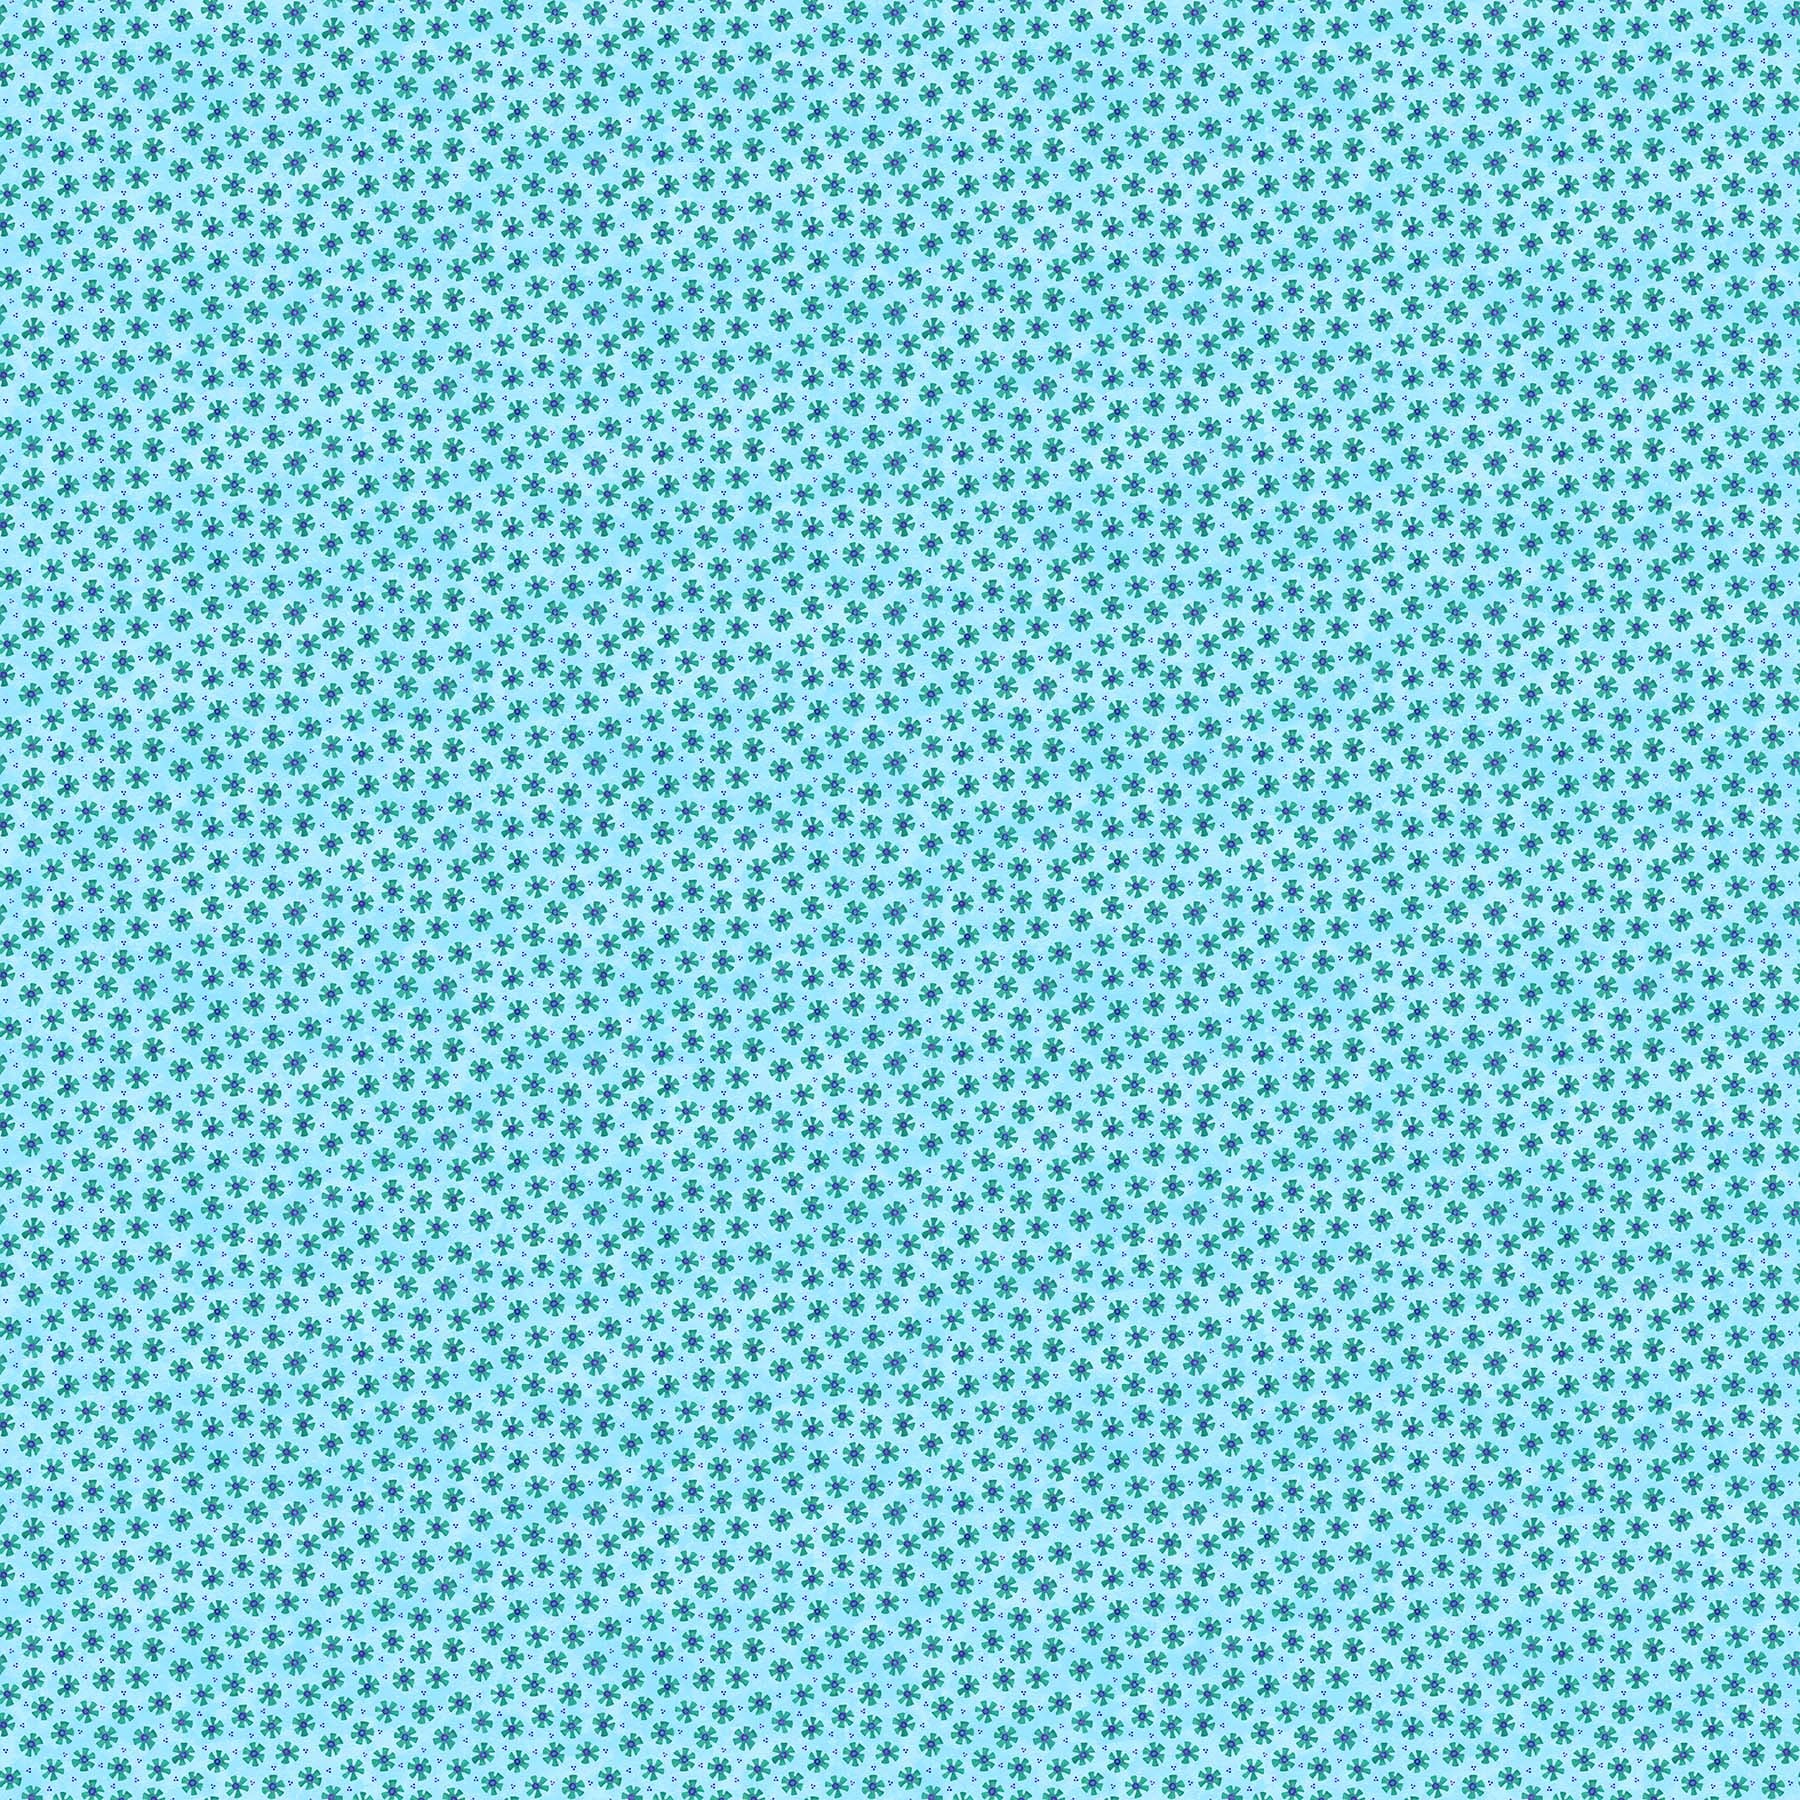 Fabric, Quilts and Kuspuks Turquoise 25211-62